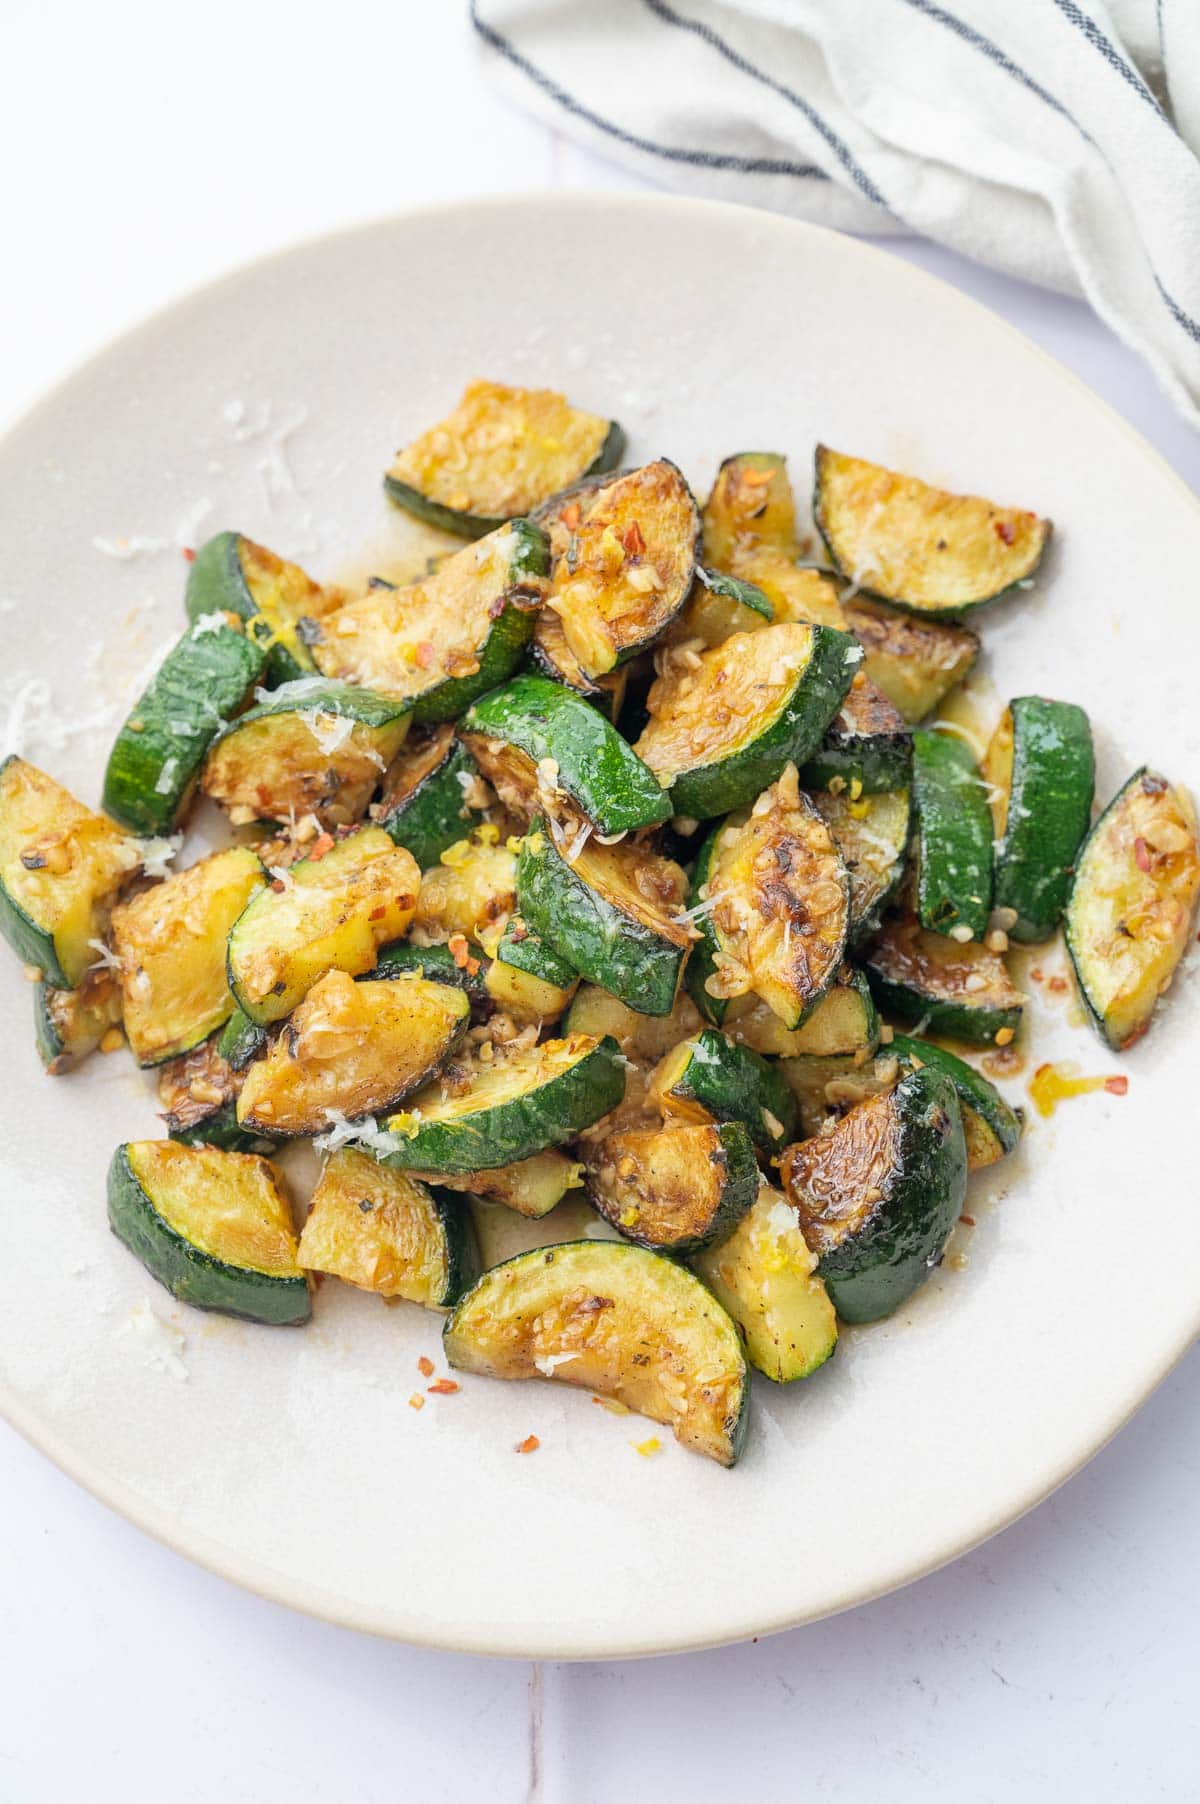 Sauteed zucchini on a beige plate.